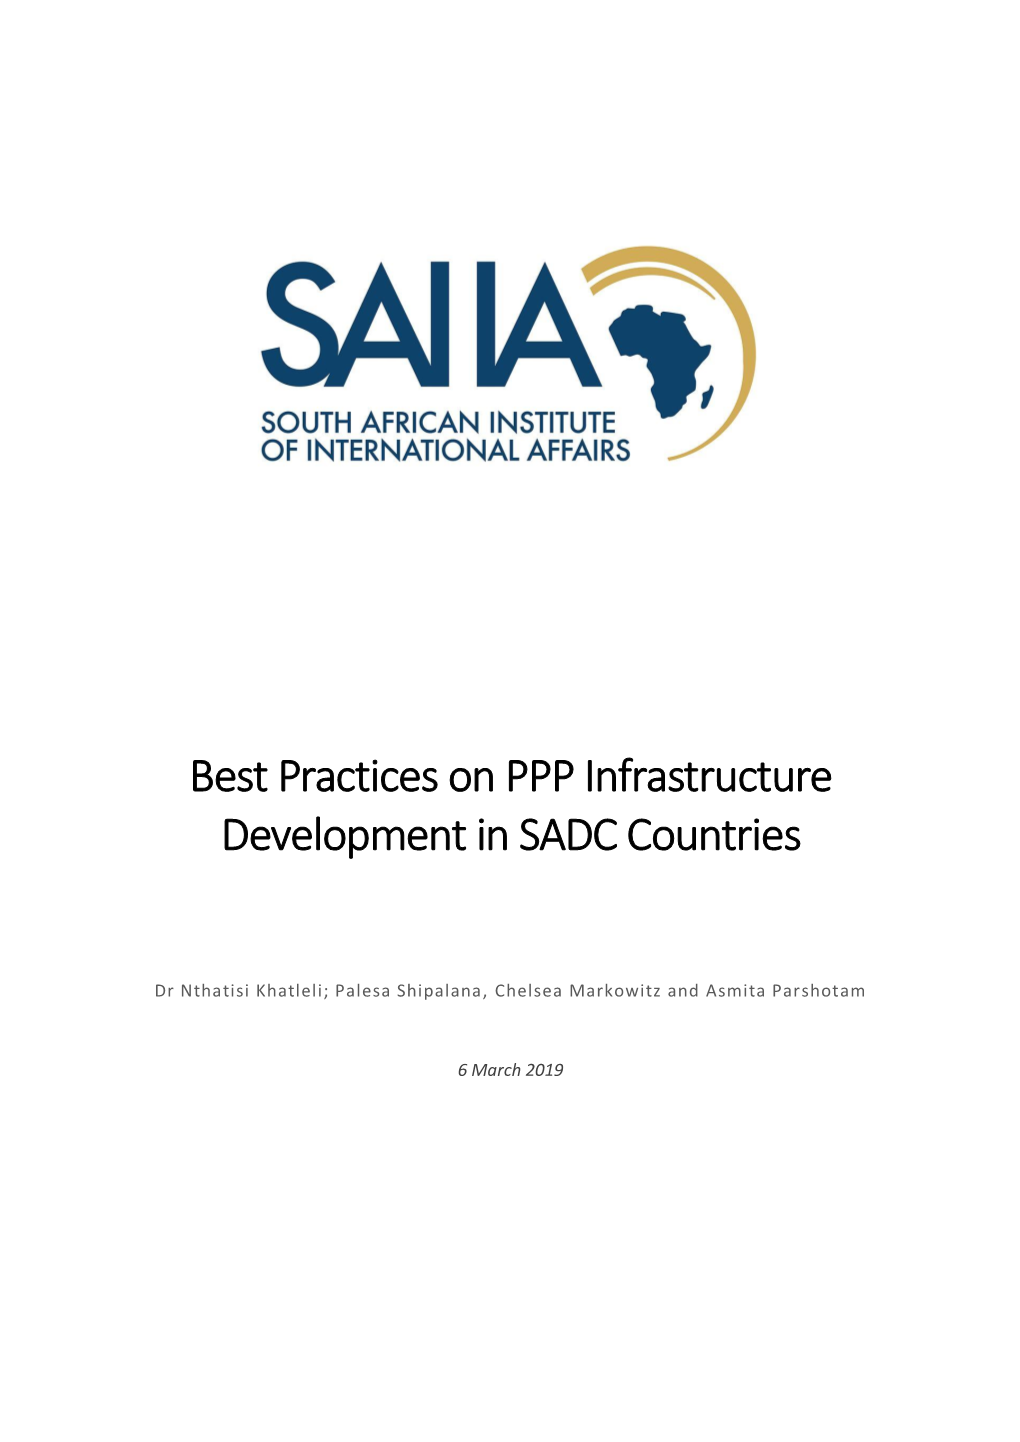 Best Practices on PPP Infrastructure Development in SADC Countries